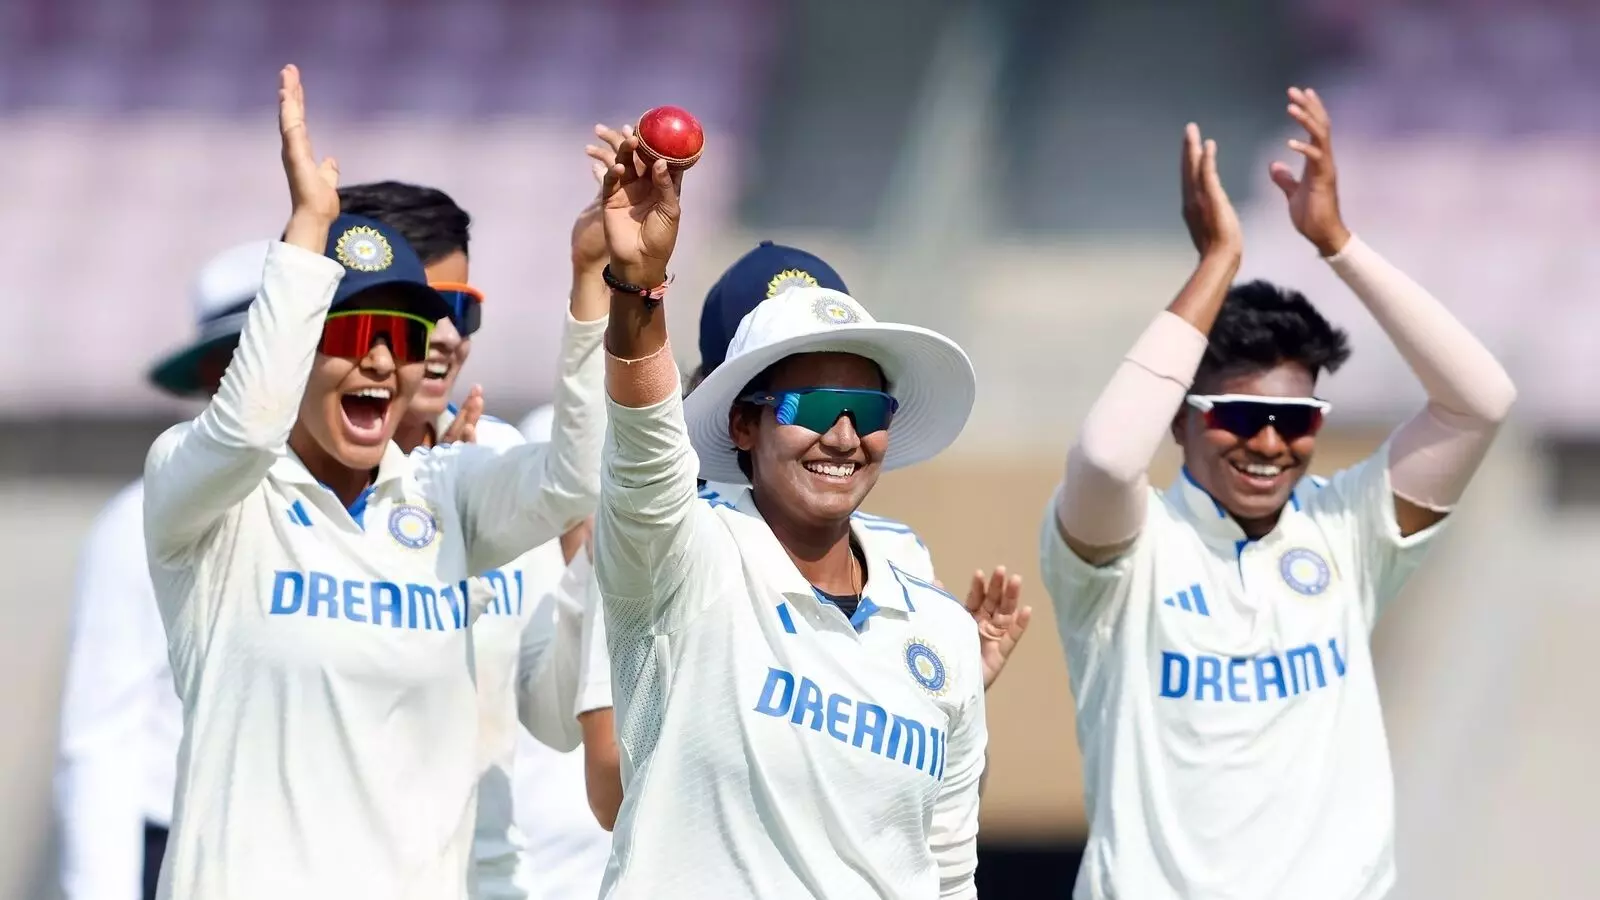 In womens cricket, India thrashed England in one-off Test match in Mumbai by margin of 347 runs